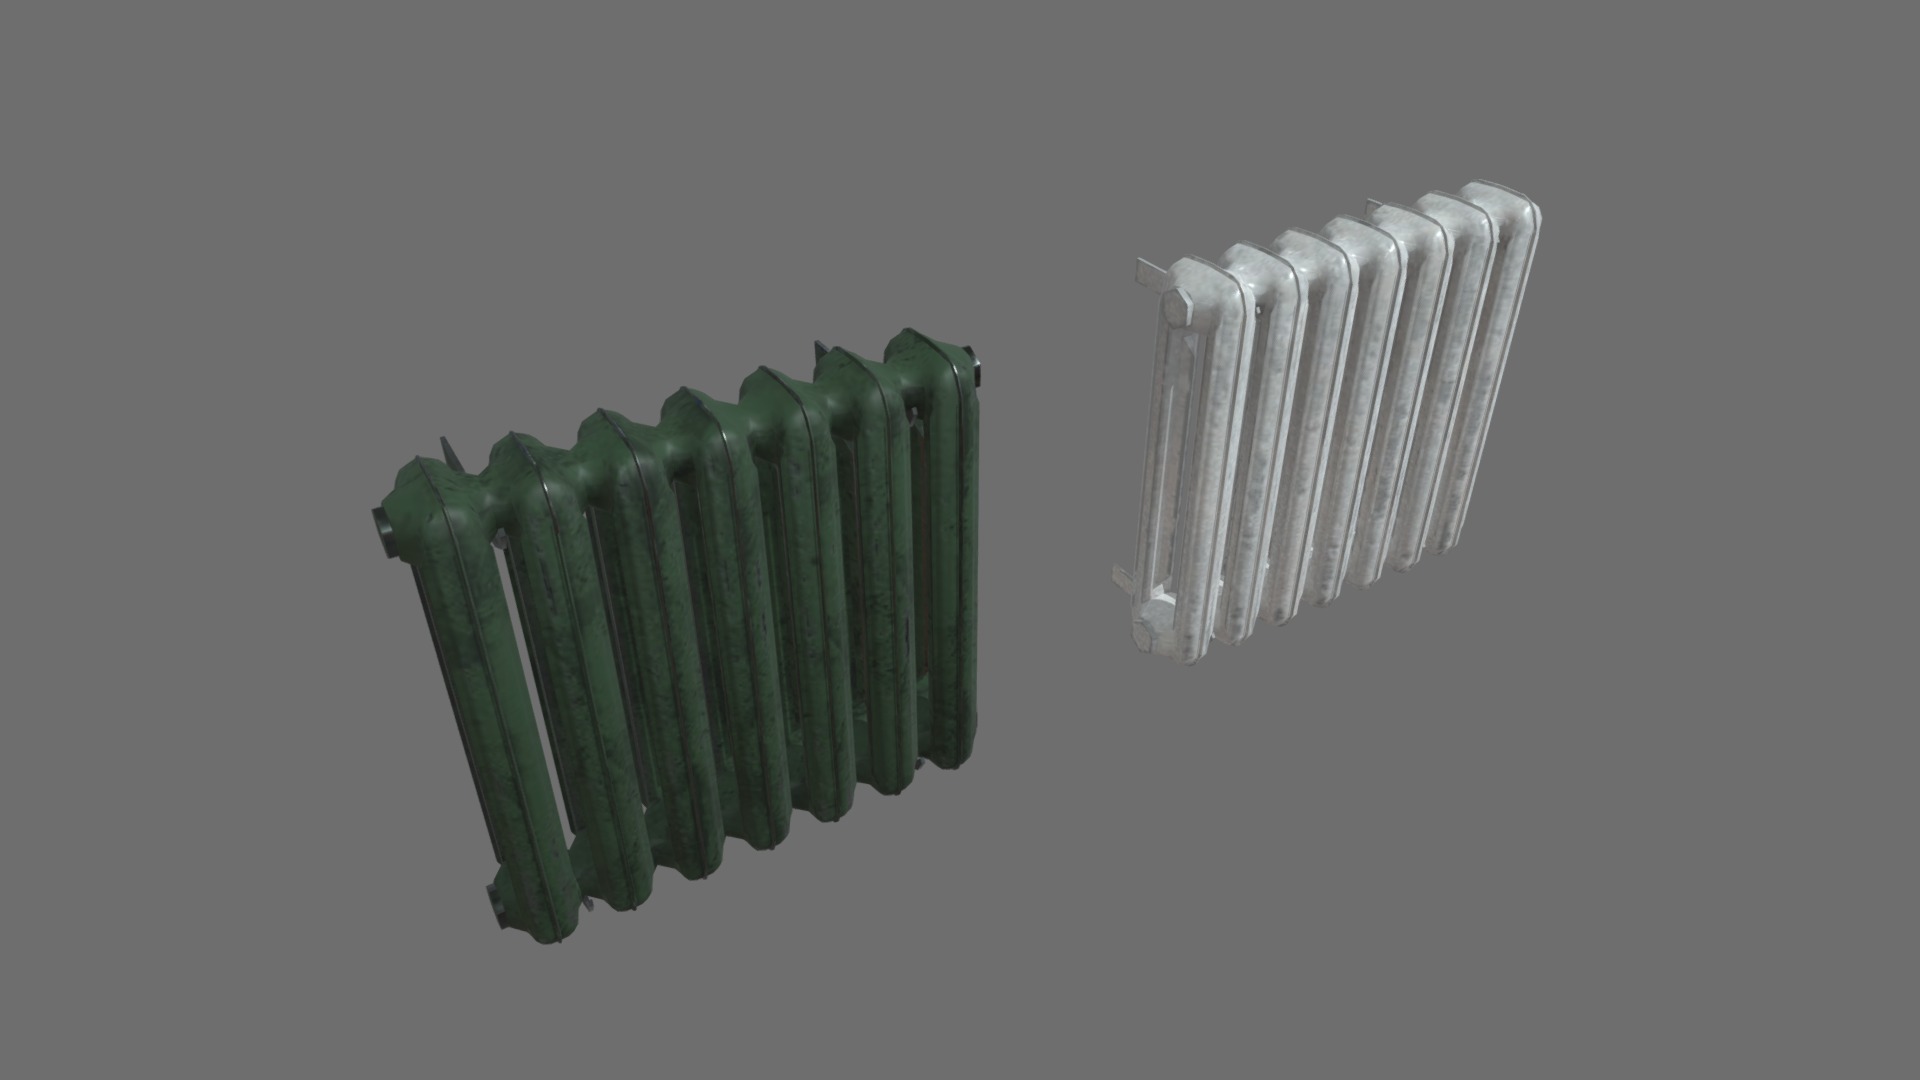 3D model Radiator mc140 - This is a 3D model of the Radiator mc140. The 3D model is about a toothbrush with green toothpaste on it.